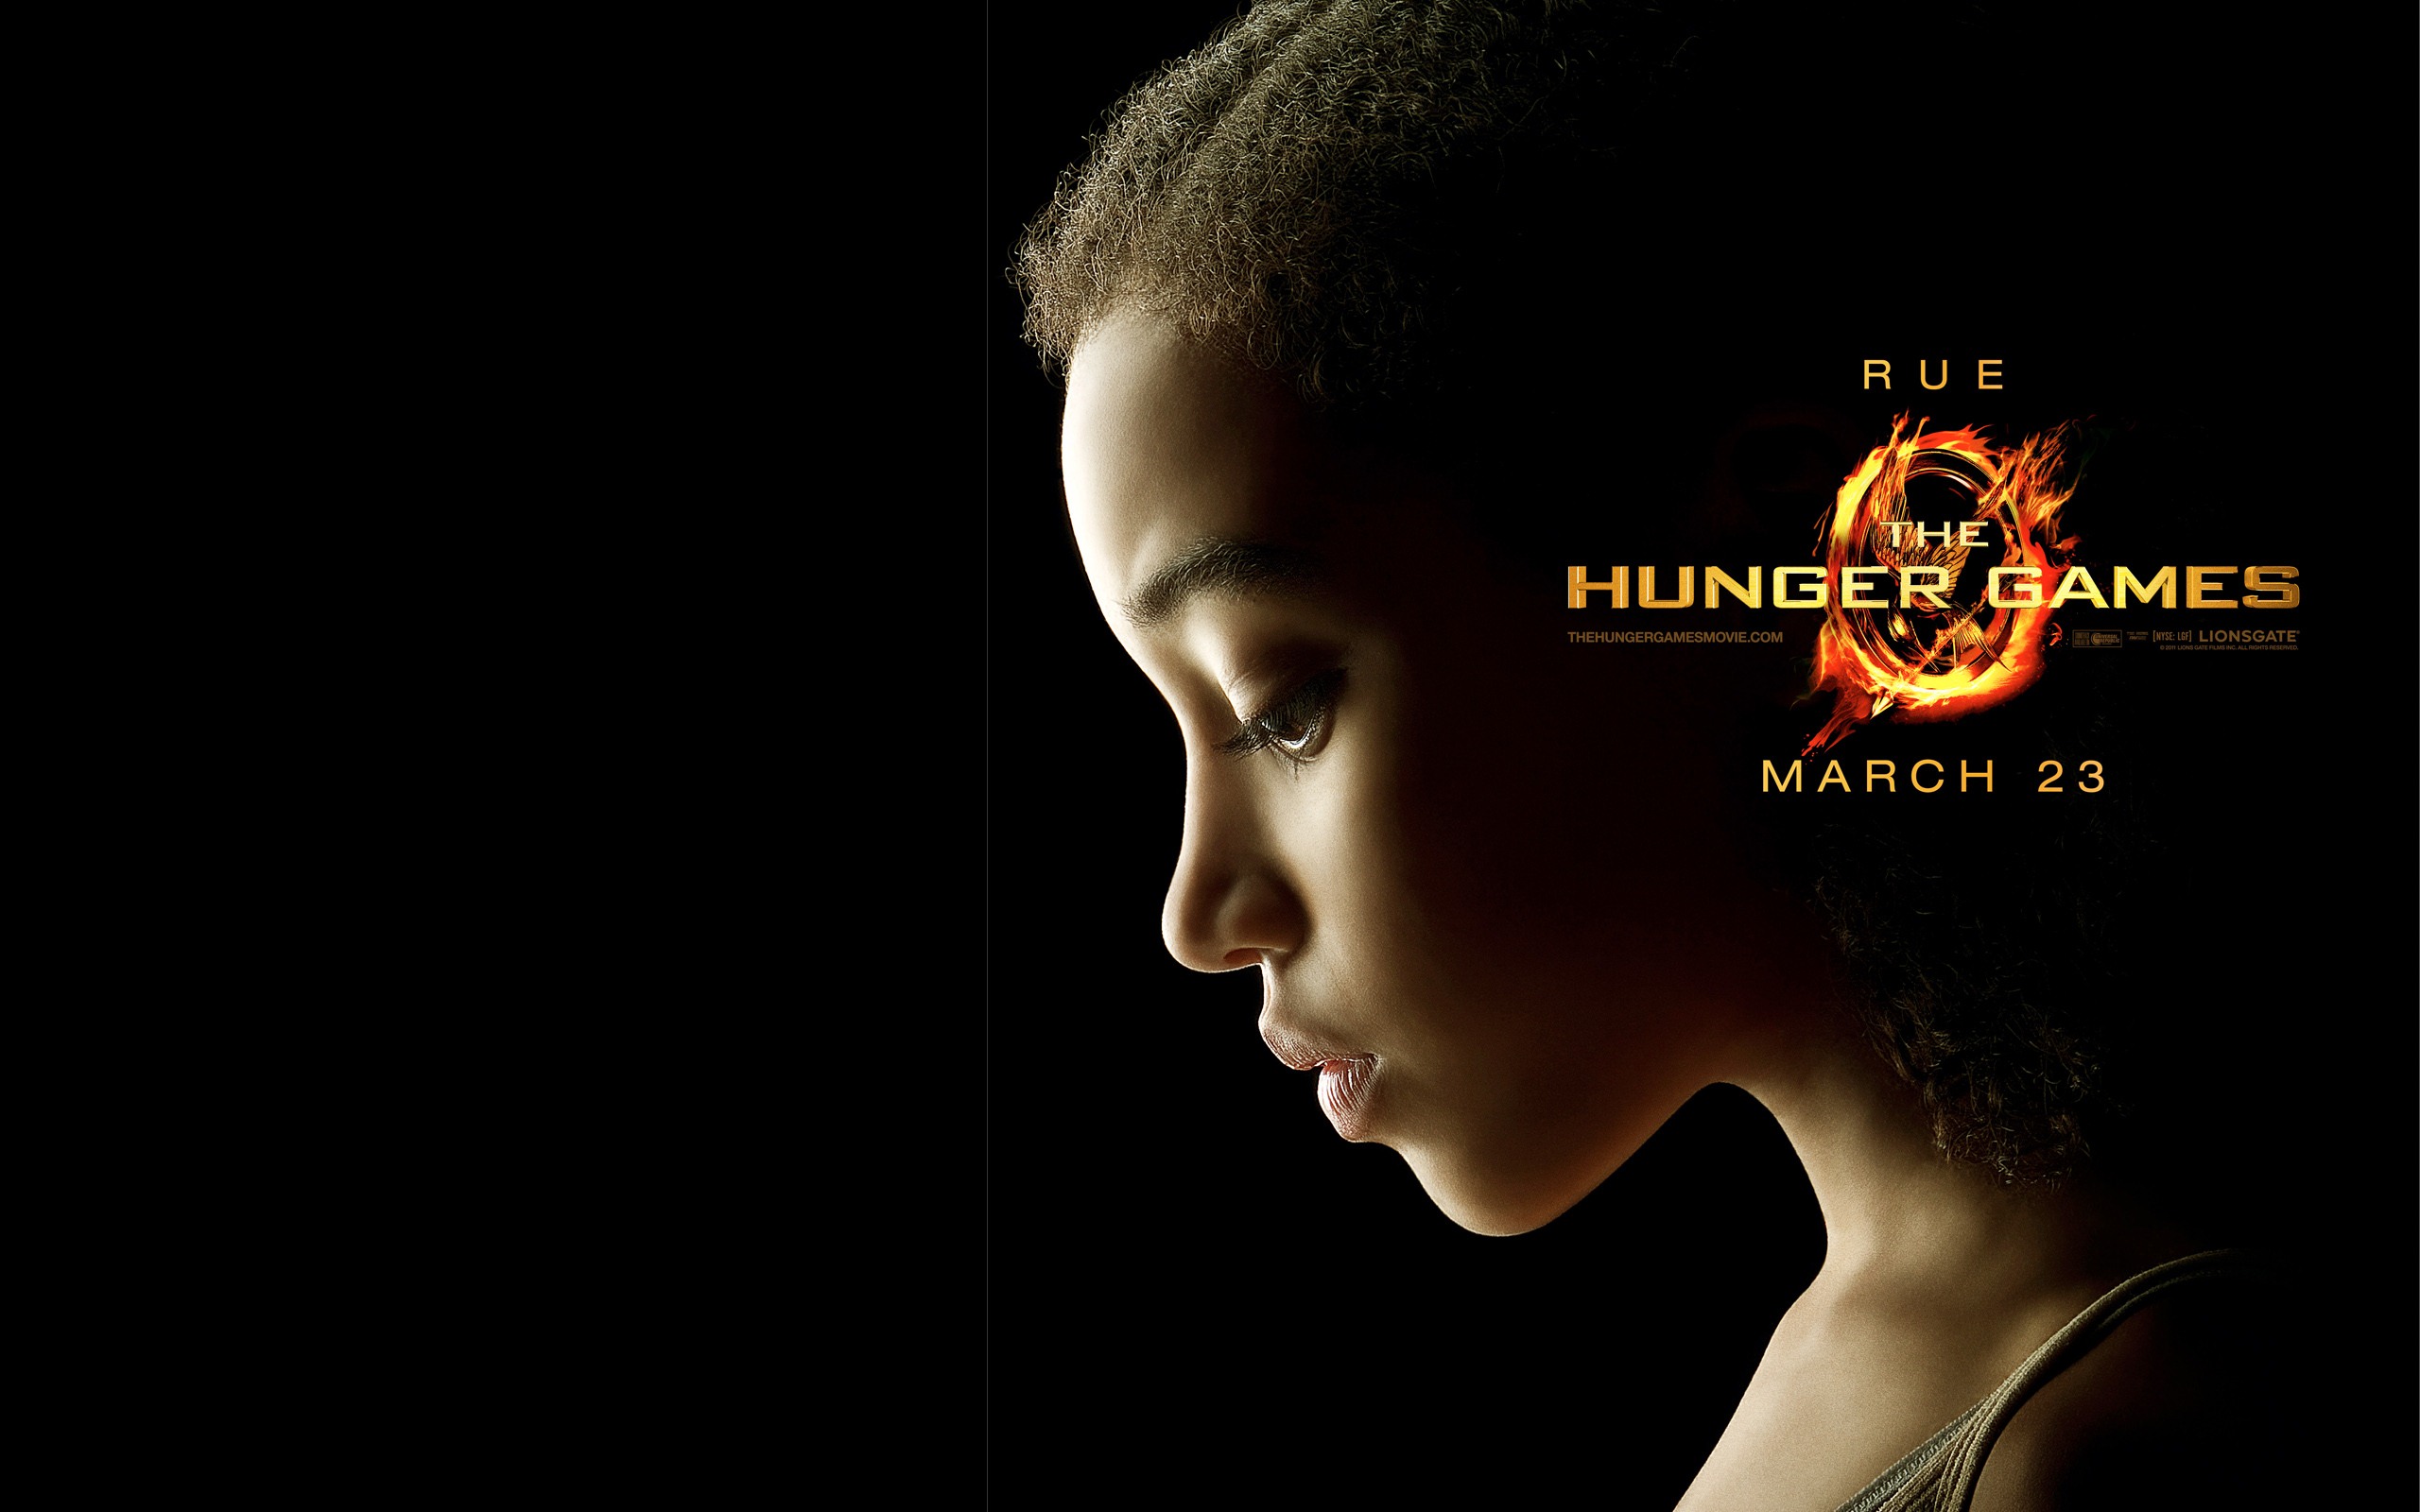 The Hunger Games HD wallpapers #2 - 2560x1600